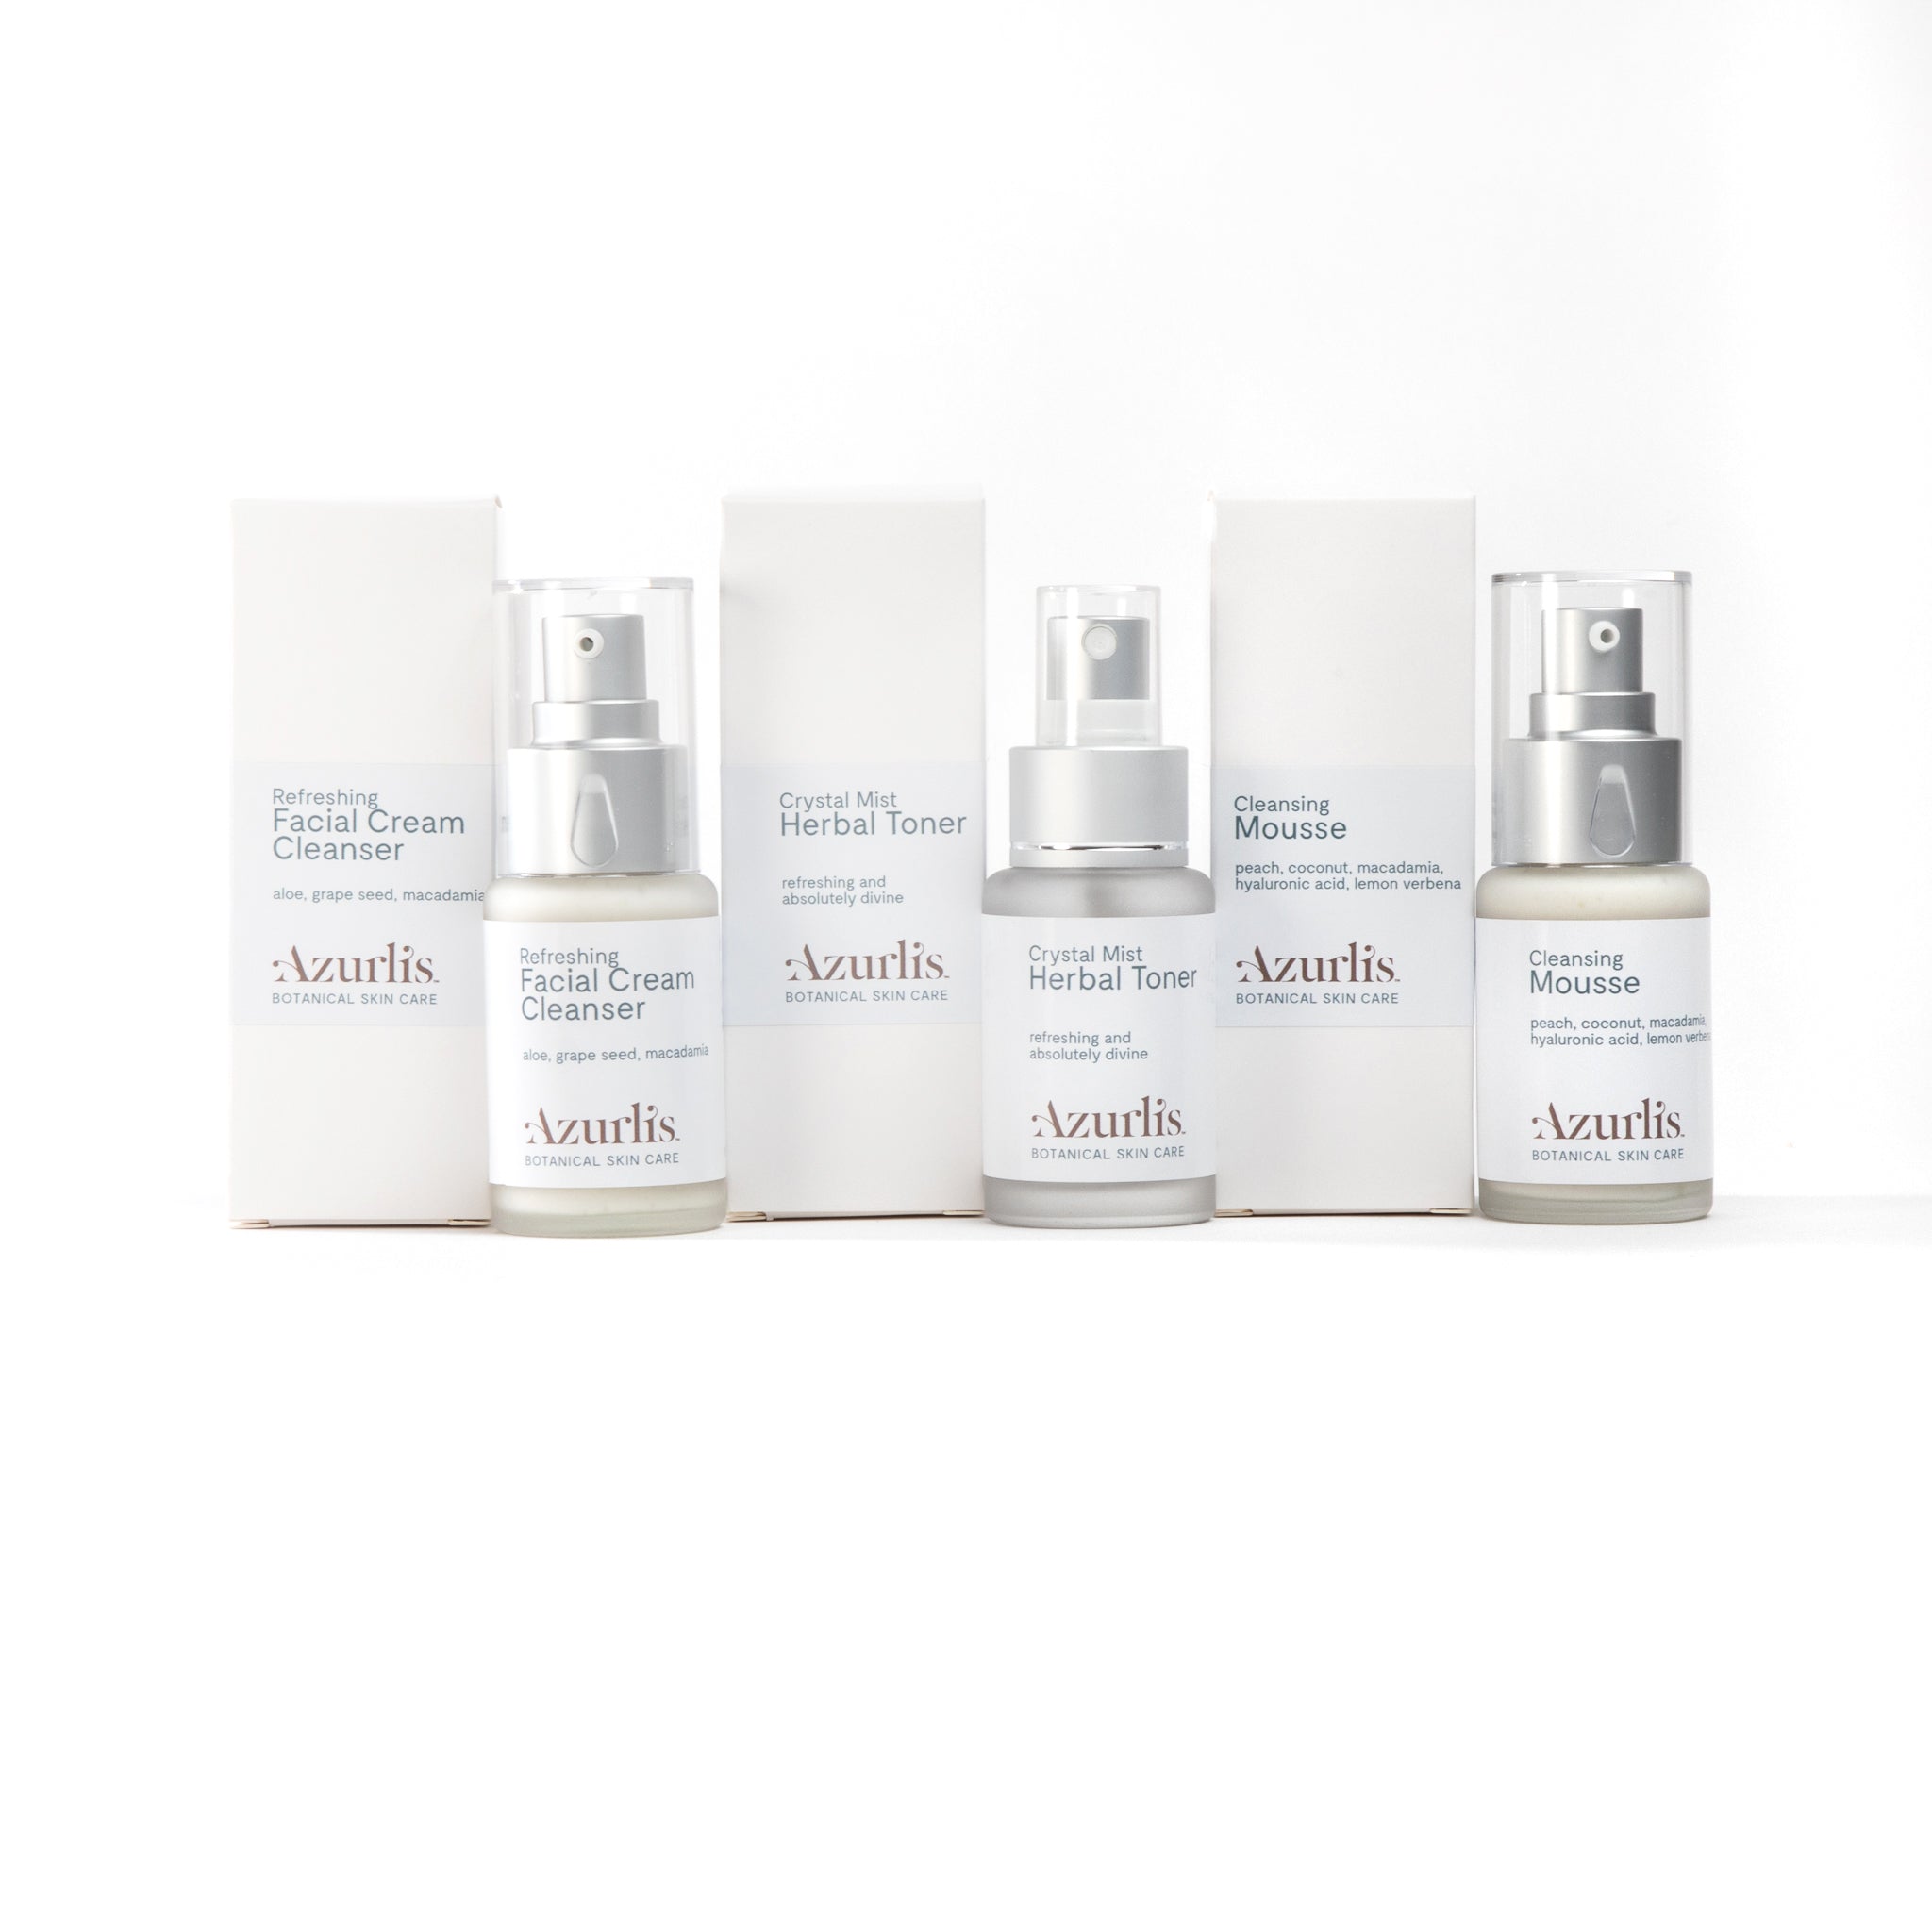 Azurlis™ Timeless Skin Serum 30ml Mini is formulated to encourage deep cellular regeneration and skin restructuring. With botanical oils including macadamia oil, organic jojoba oil, borage oil, organic evening primrose oil, organic rosehip oil, camellia oil, as well as essential oils from rosa damascena, lavender and tangerine. Ideal to help reduce stretch marks and improve the condition of scar tissue.